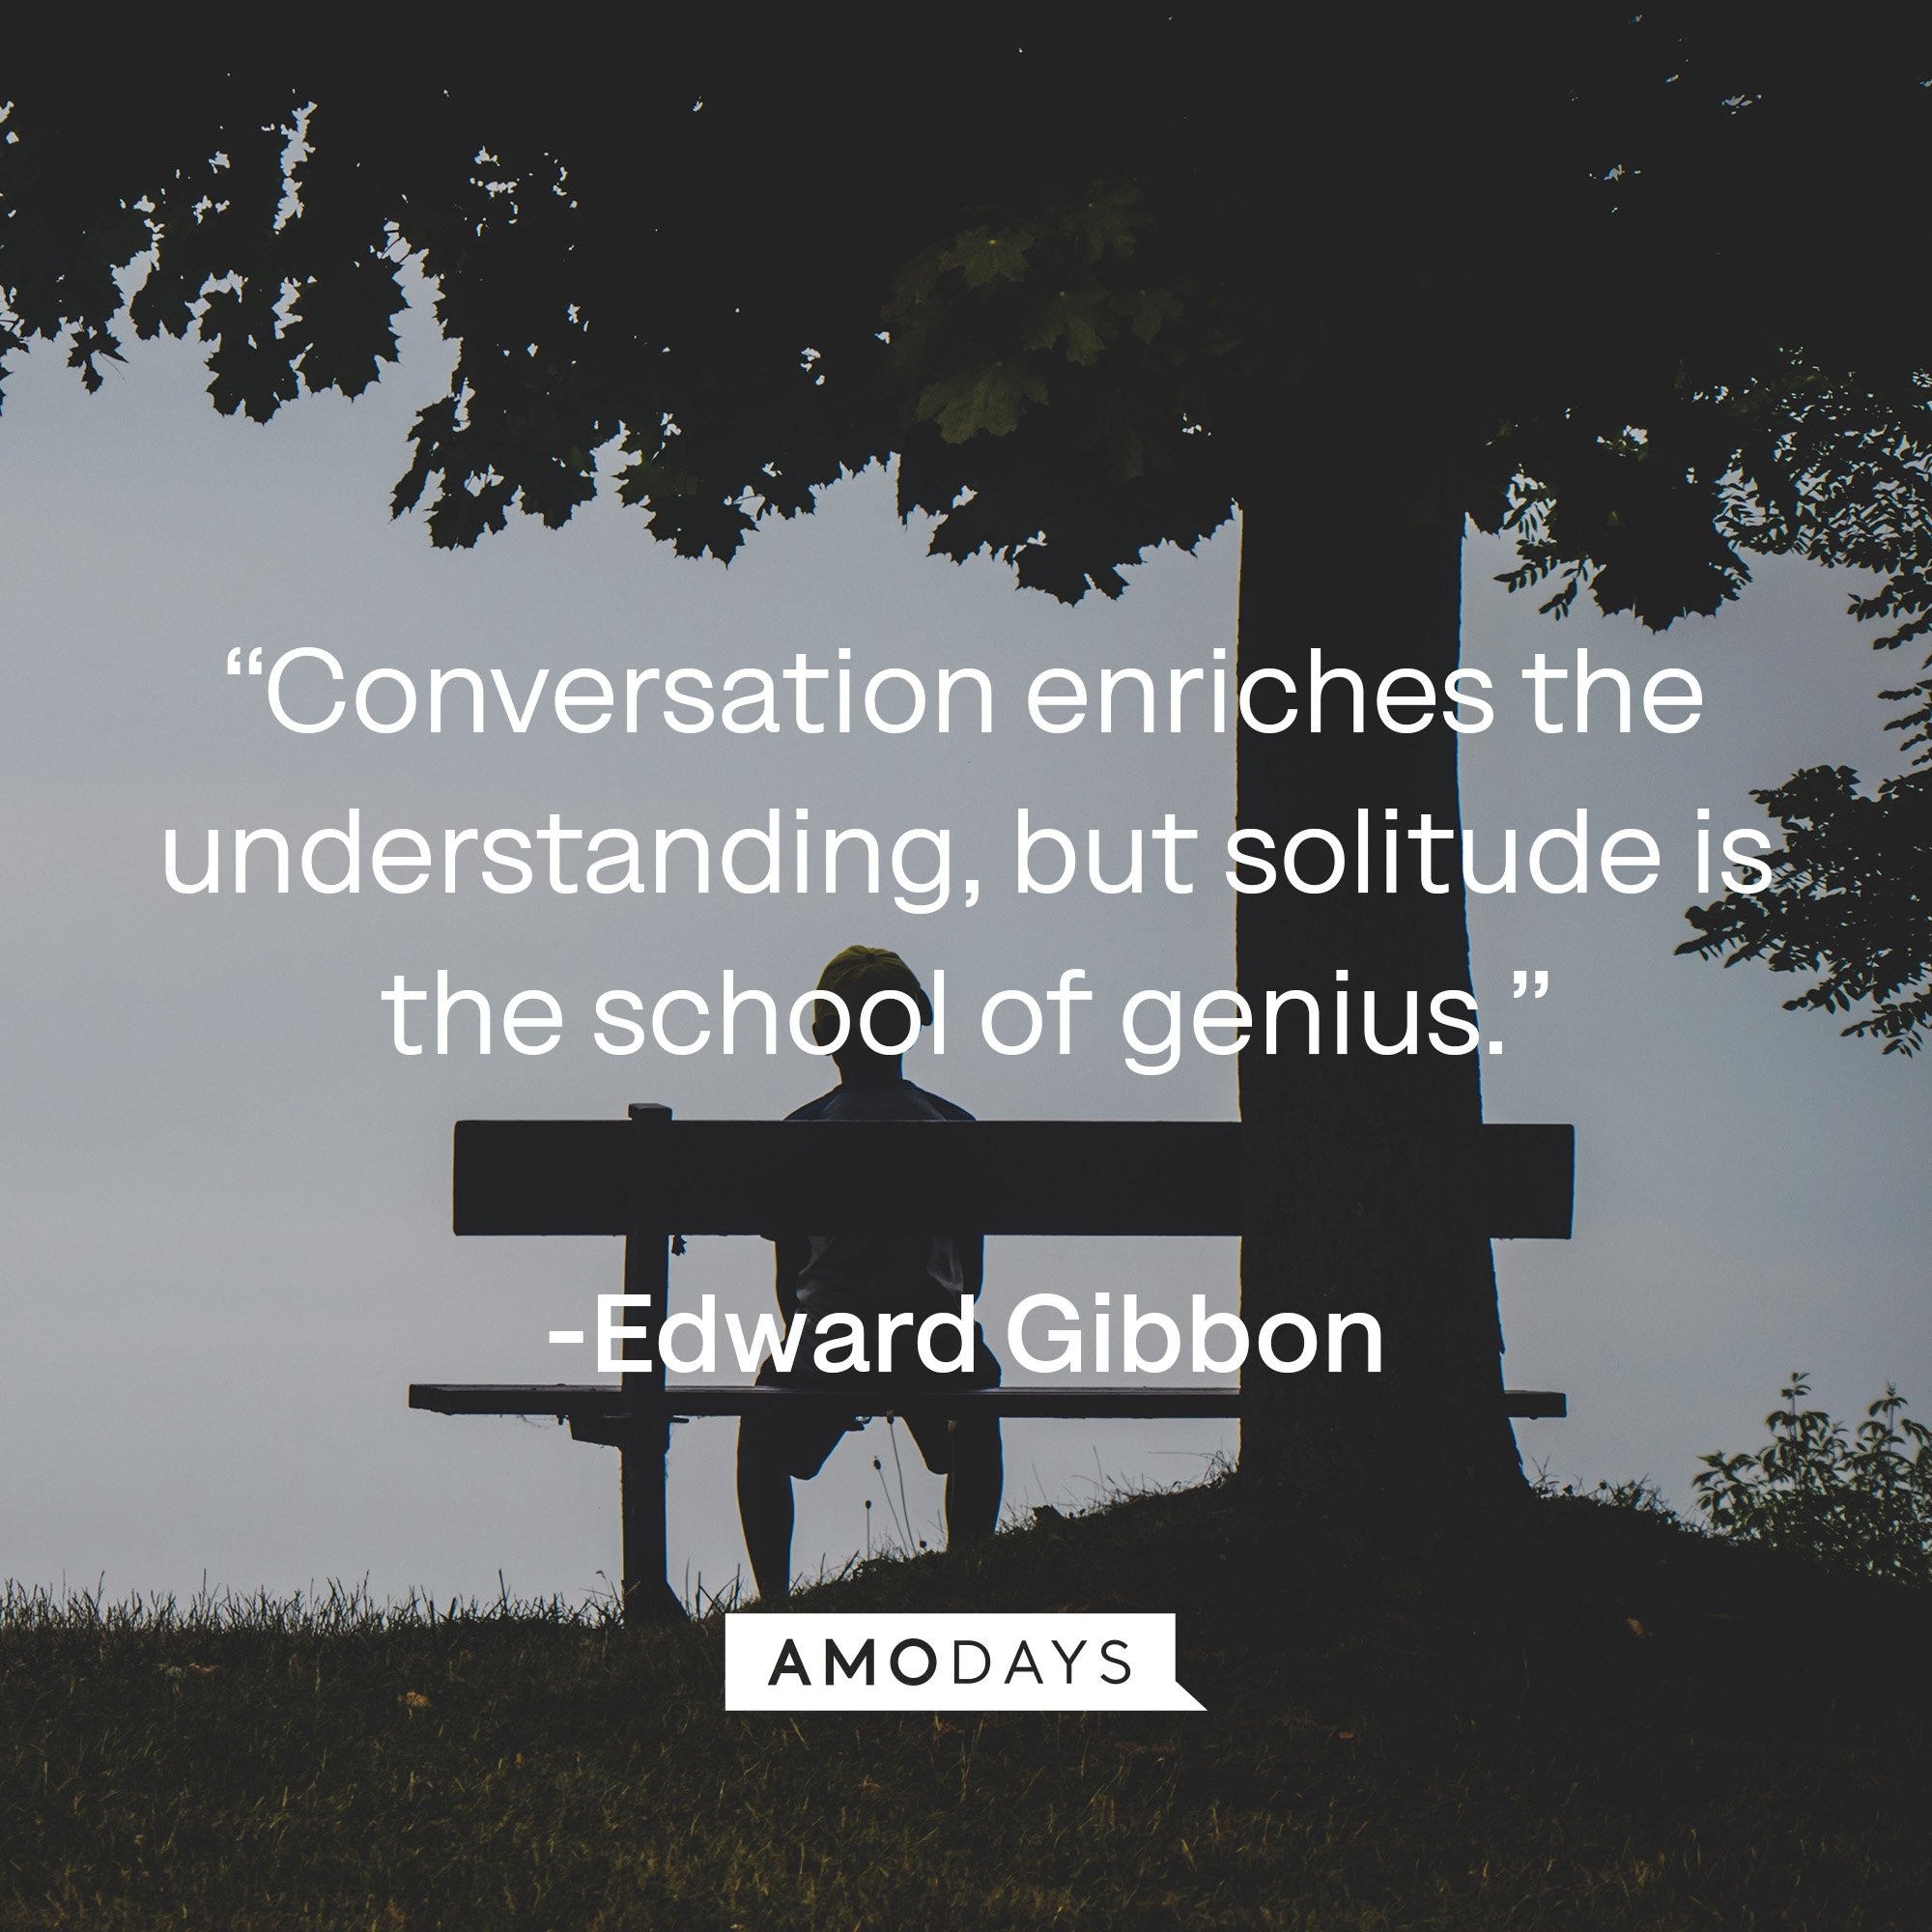 Edward Gibbon’s quote: “Conversation enriches the understanding, but solitude is the school of genius.” | Image: Amodays